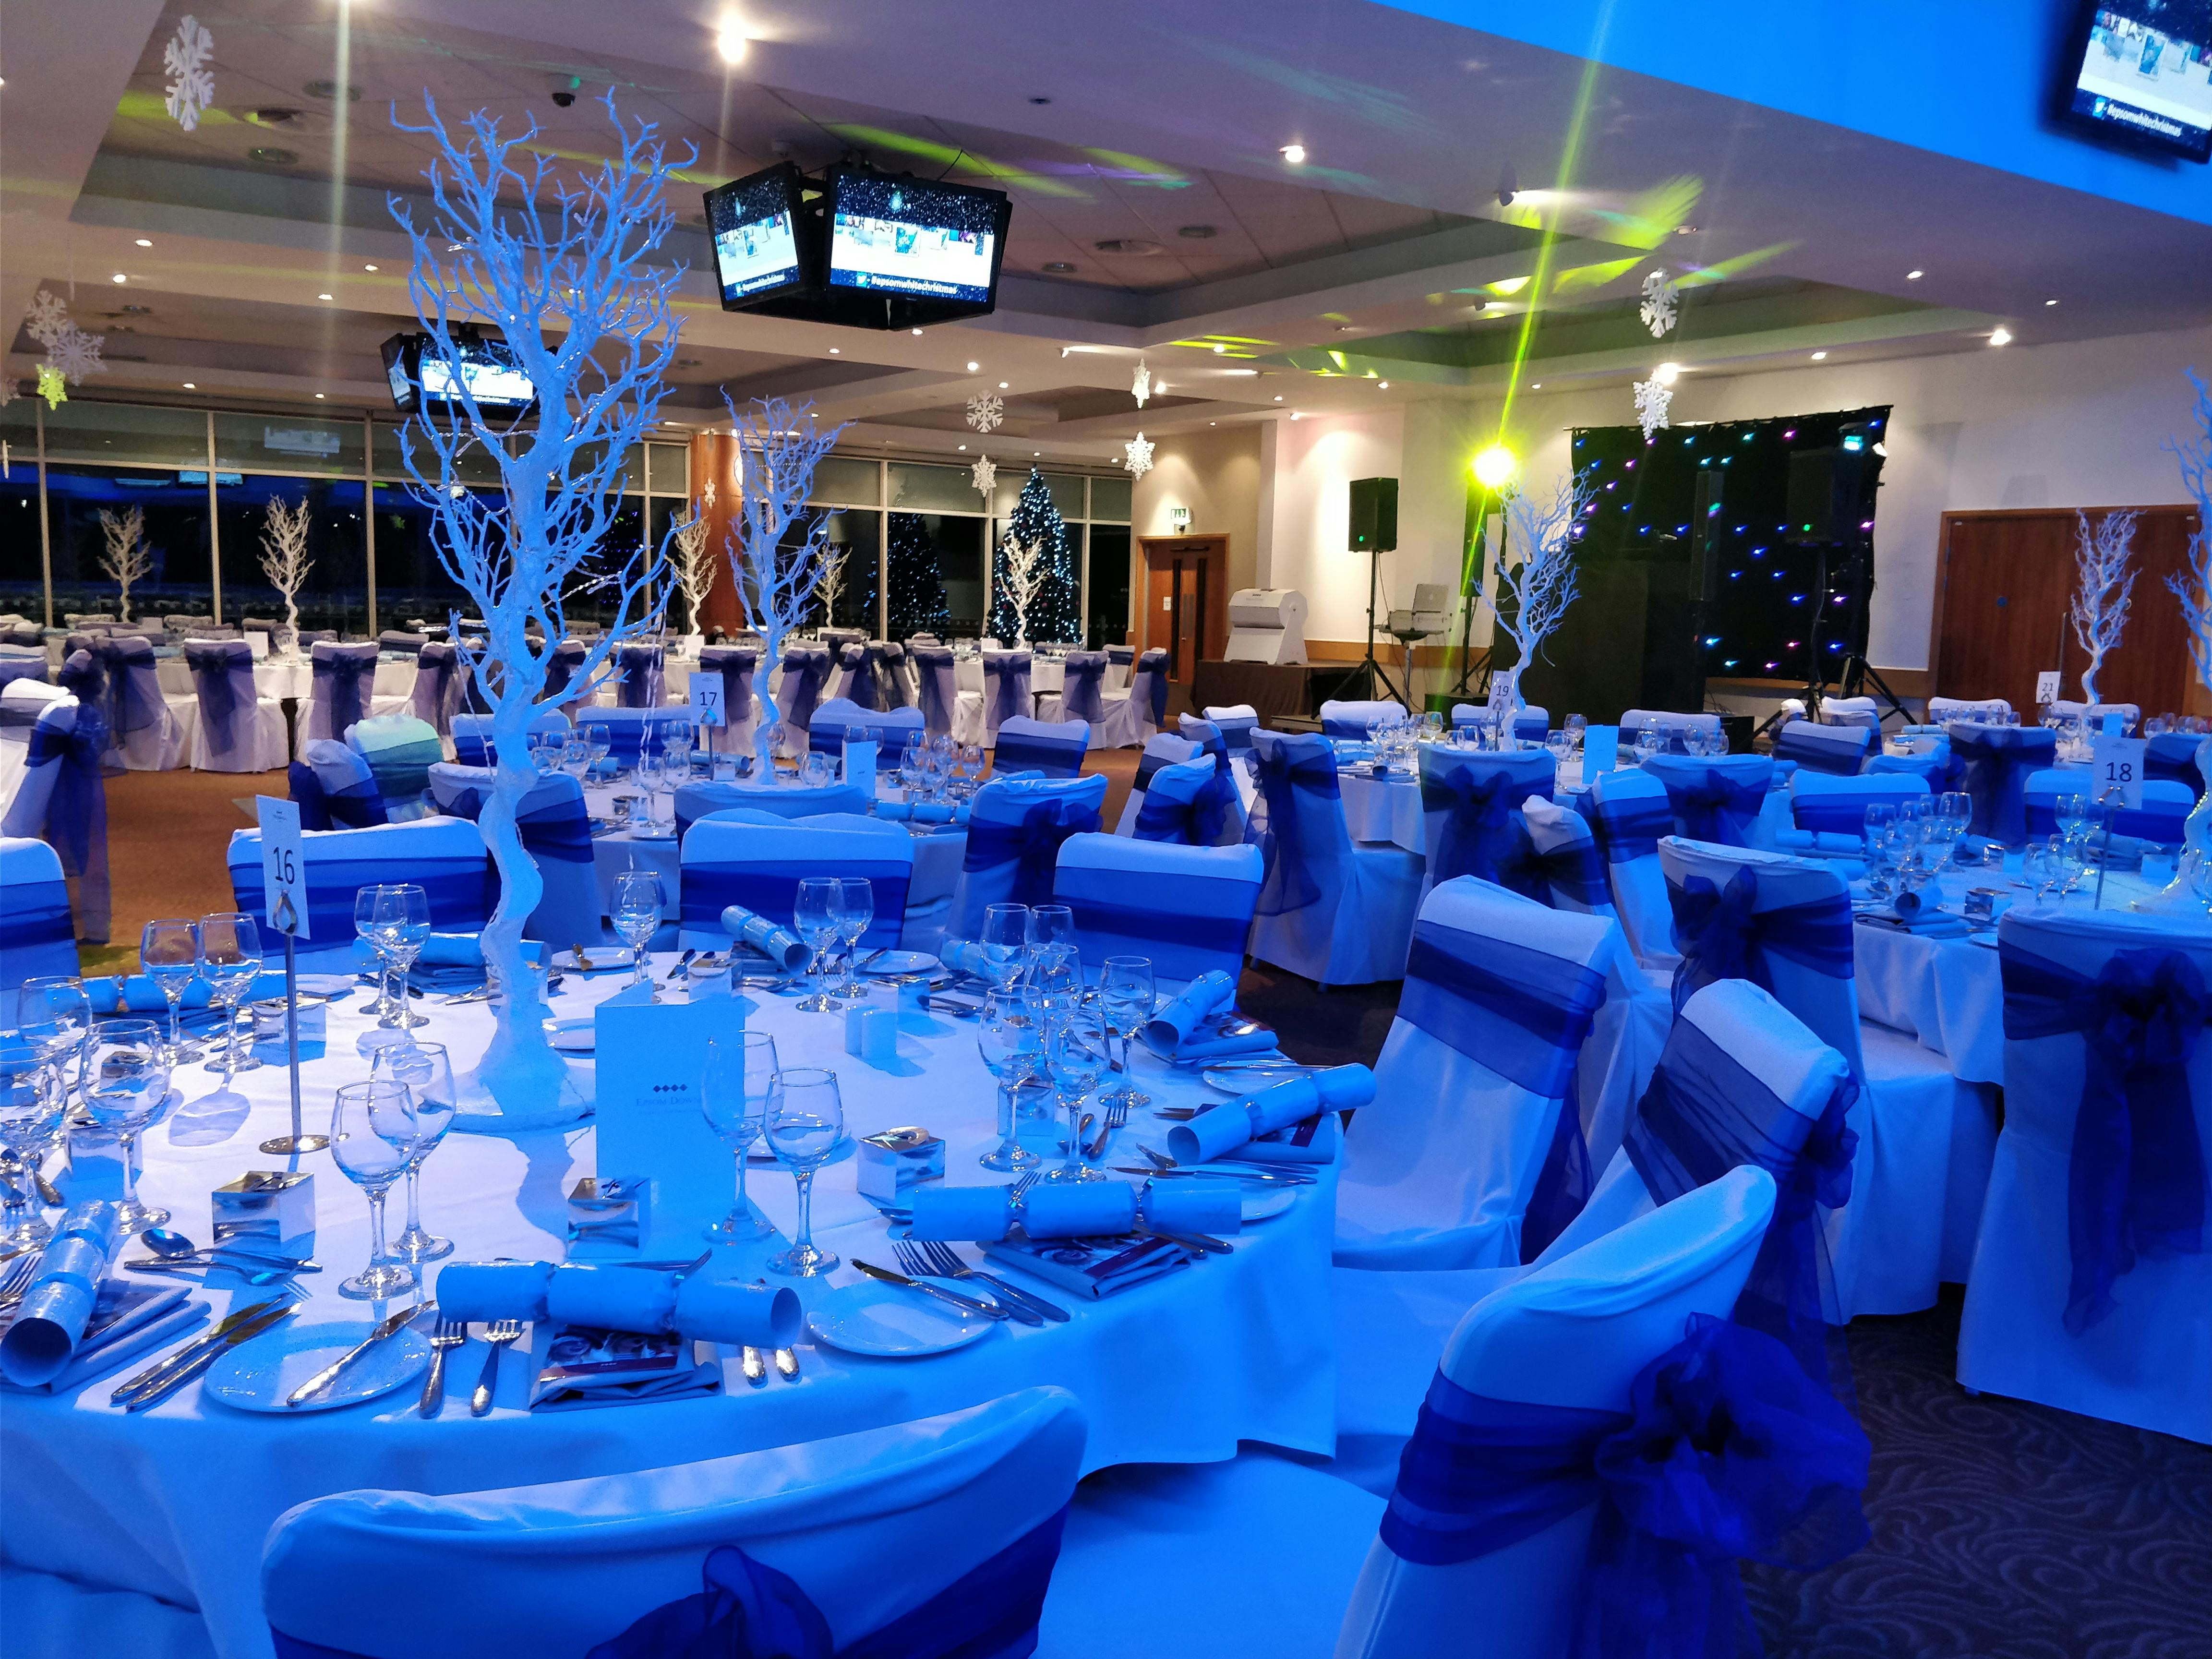 Epsom Downs Racecourse - The Diomed Suite image 9